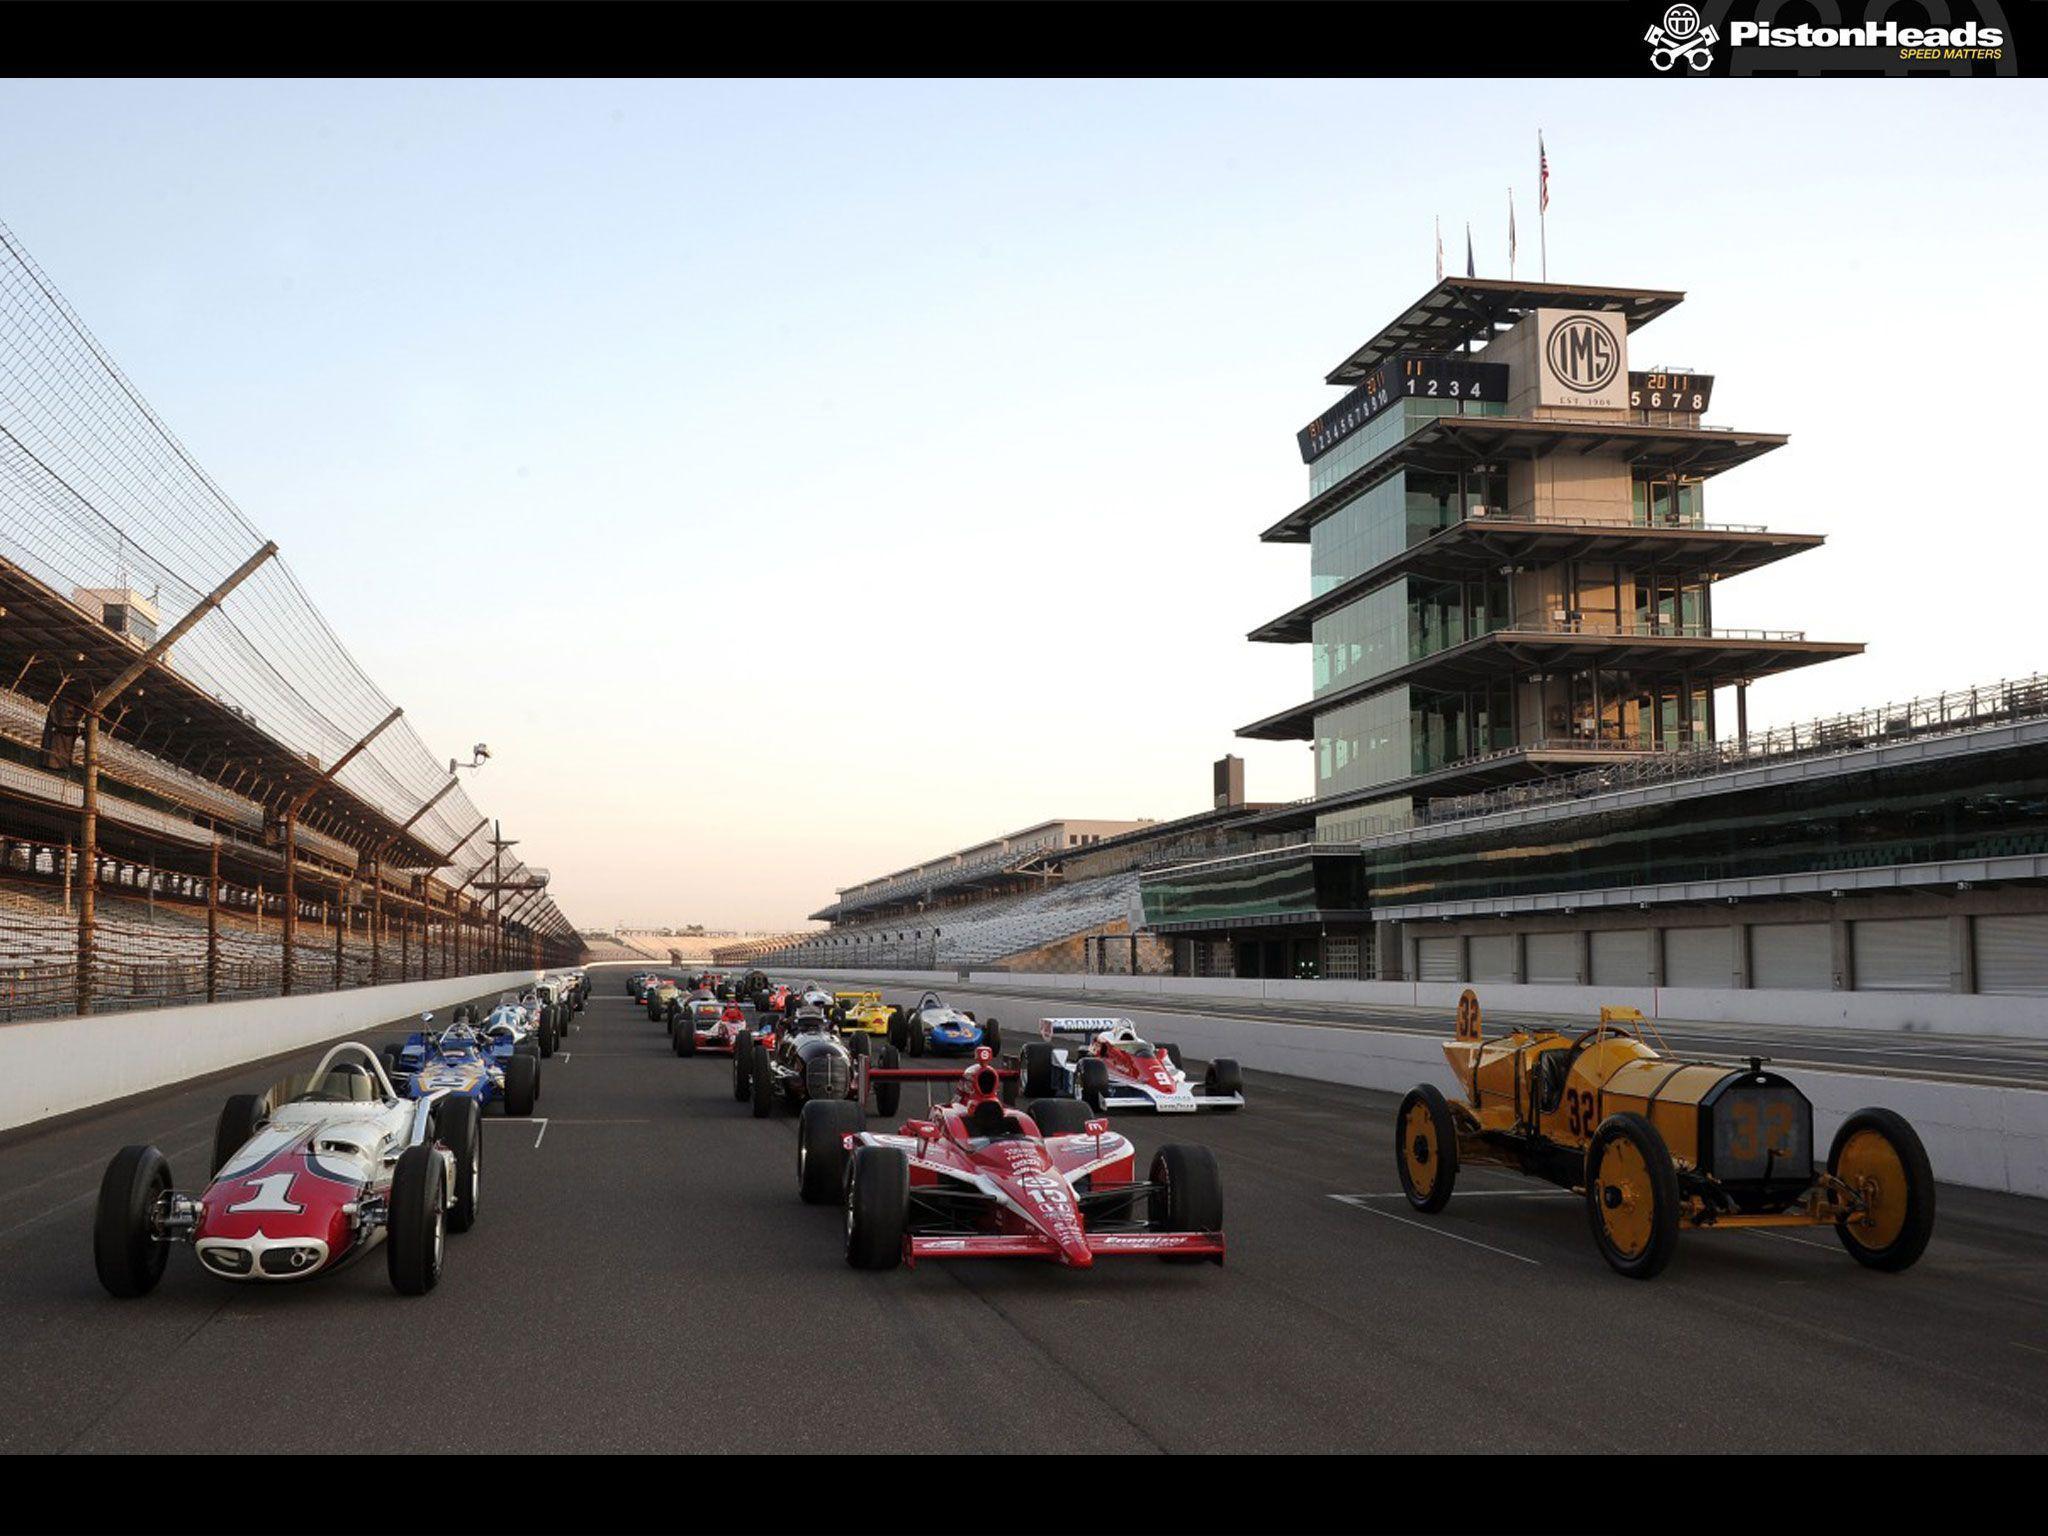 Indy 500 Wallpaper. Windy Wallpaper, Cold